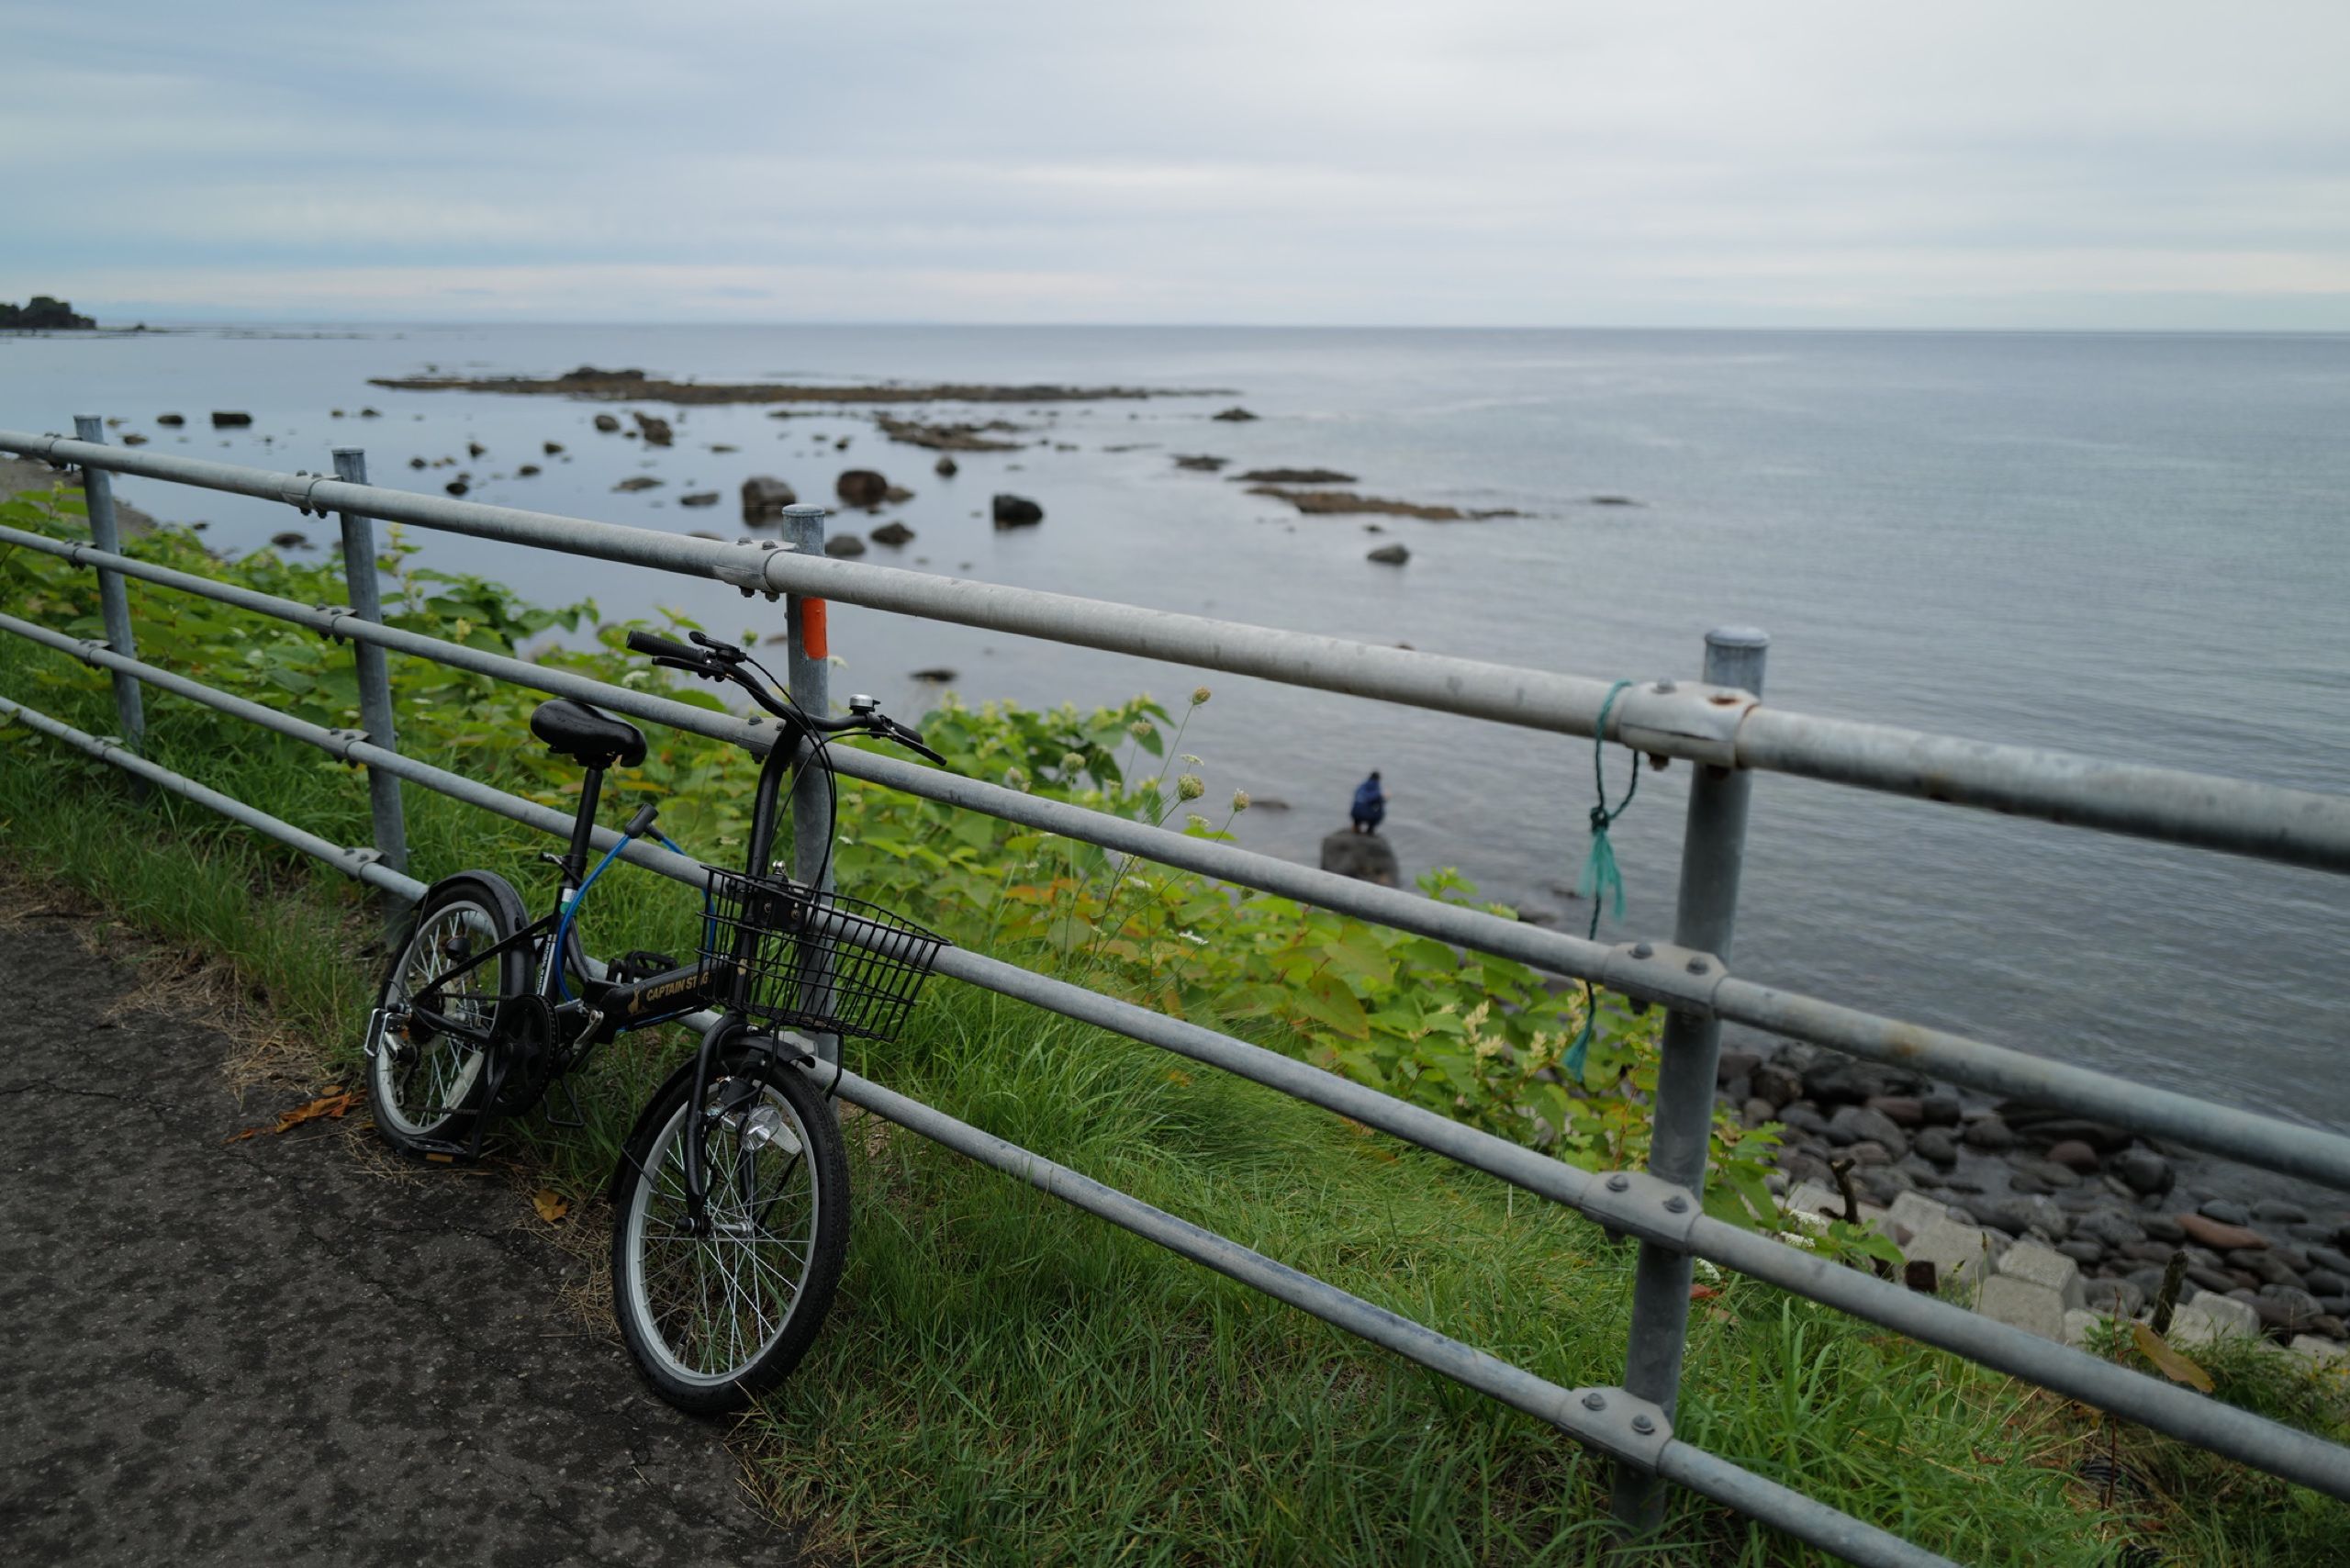 A bicycle leans against a fence by a seashore, with its presumed owner squatting on a rock below